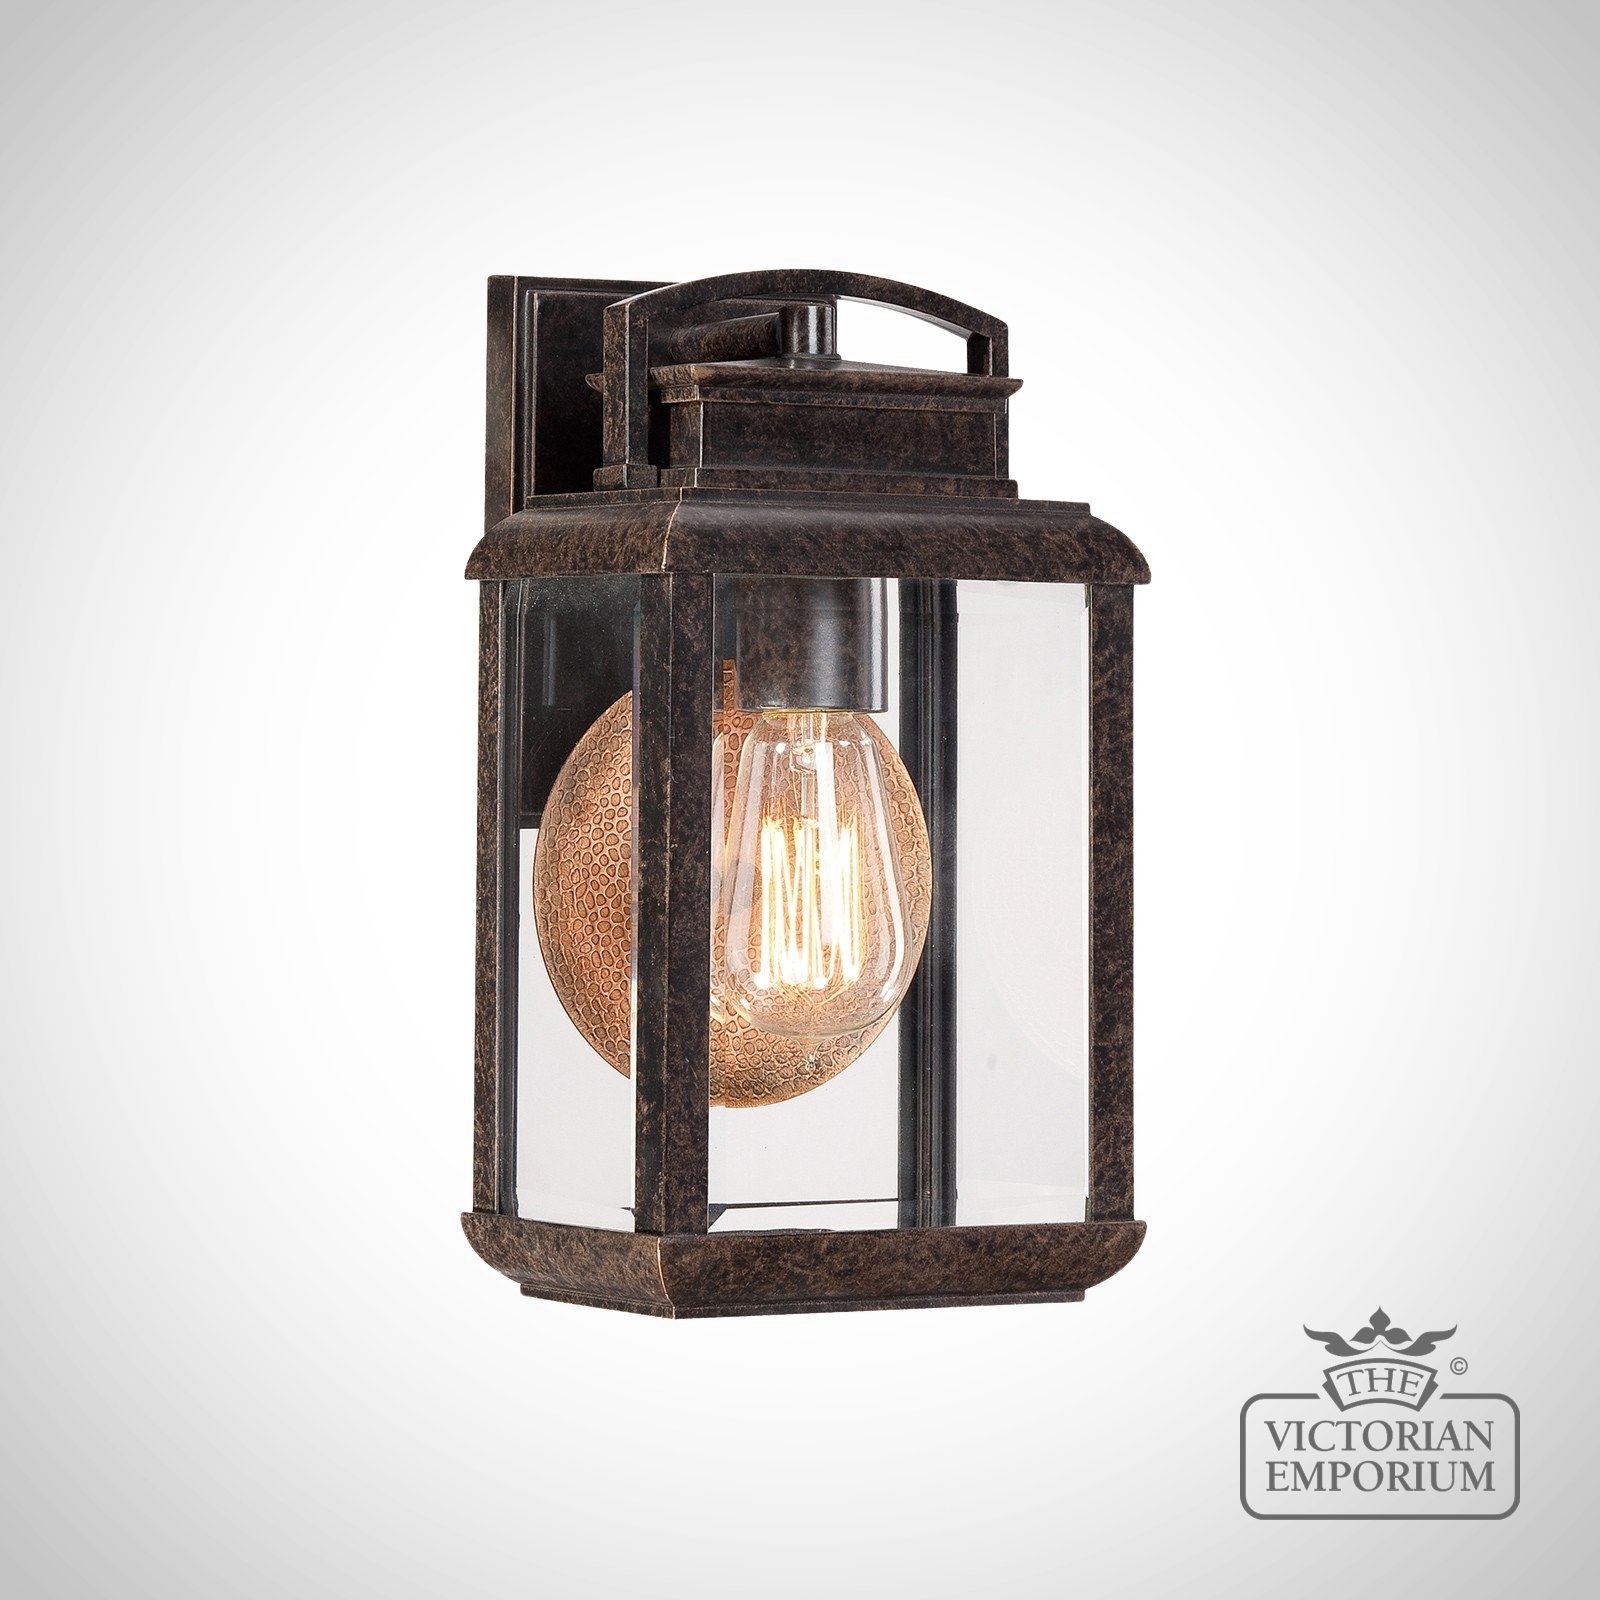 Byron Small Wall Lantern in Imperial Bronze